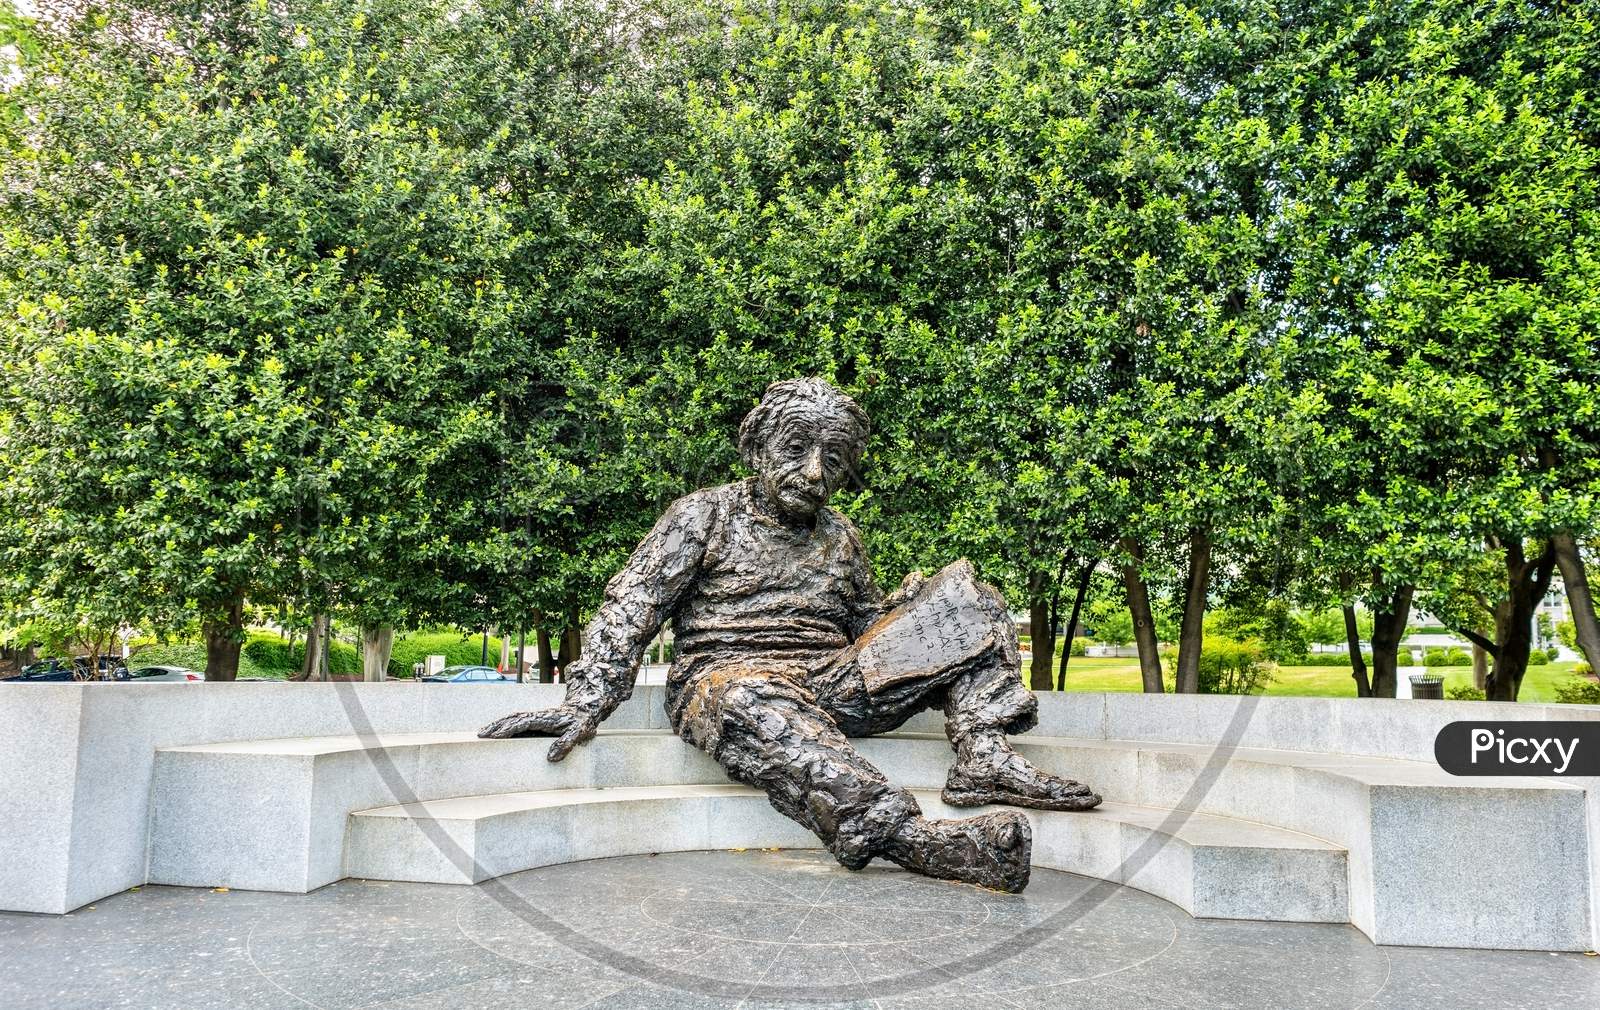 The Albert Einstein Memorial, A Bronze Statue At The National Academy Of Sciences In Washington, D.C.